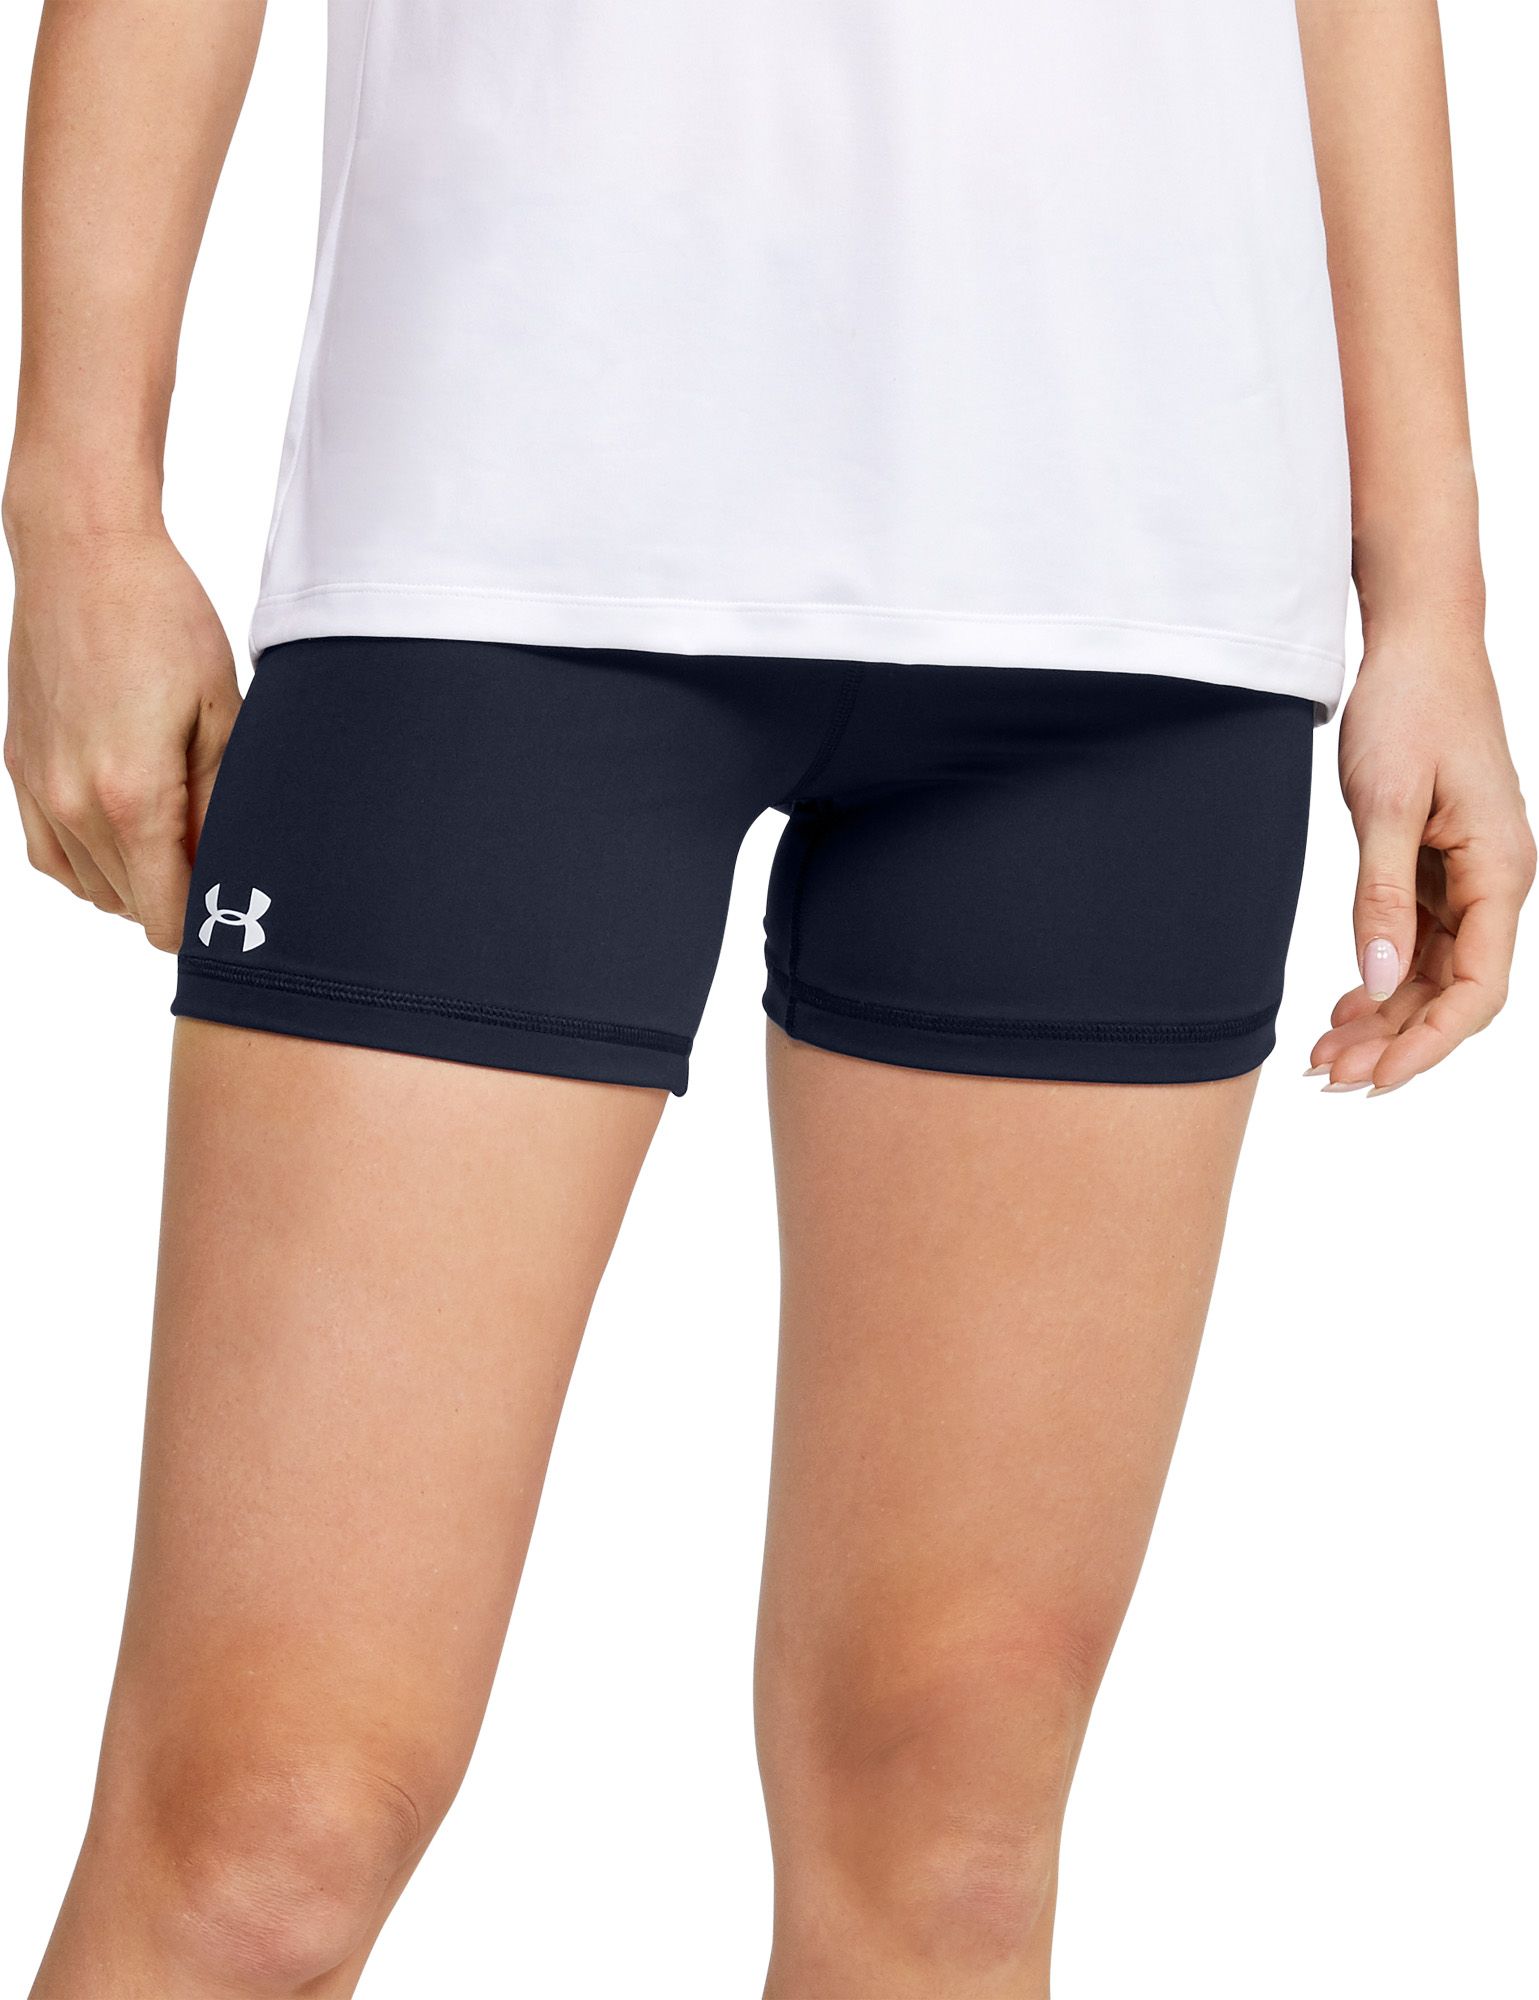 Team Shorty Volleyball Shorts 